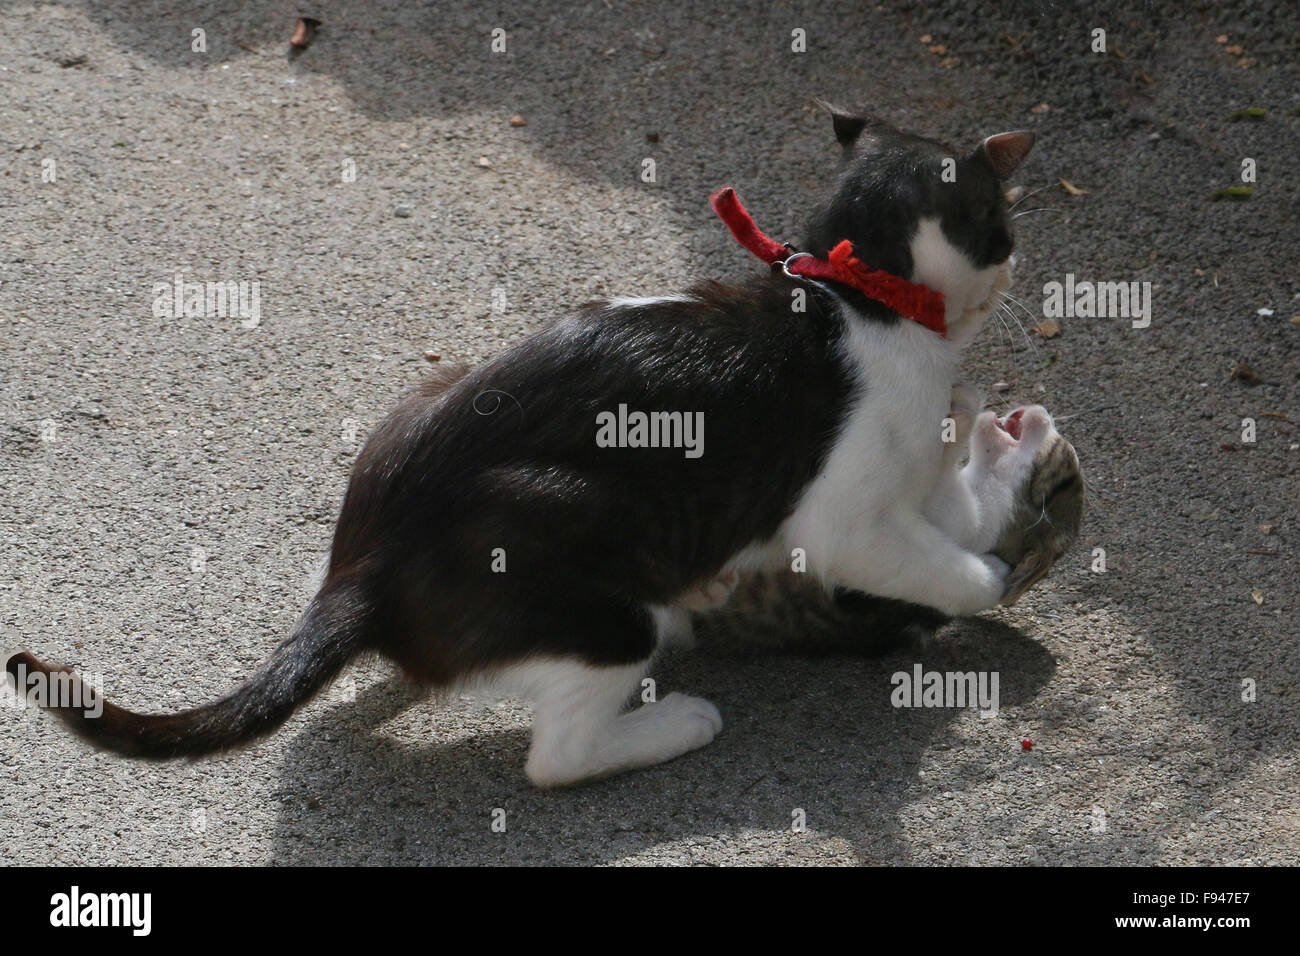 Two cats fighting on the street in daylight Stock Photo